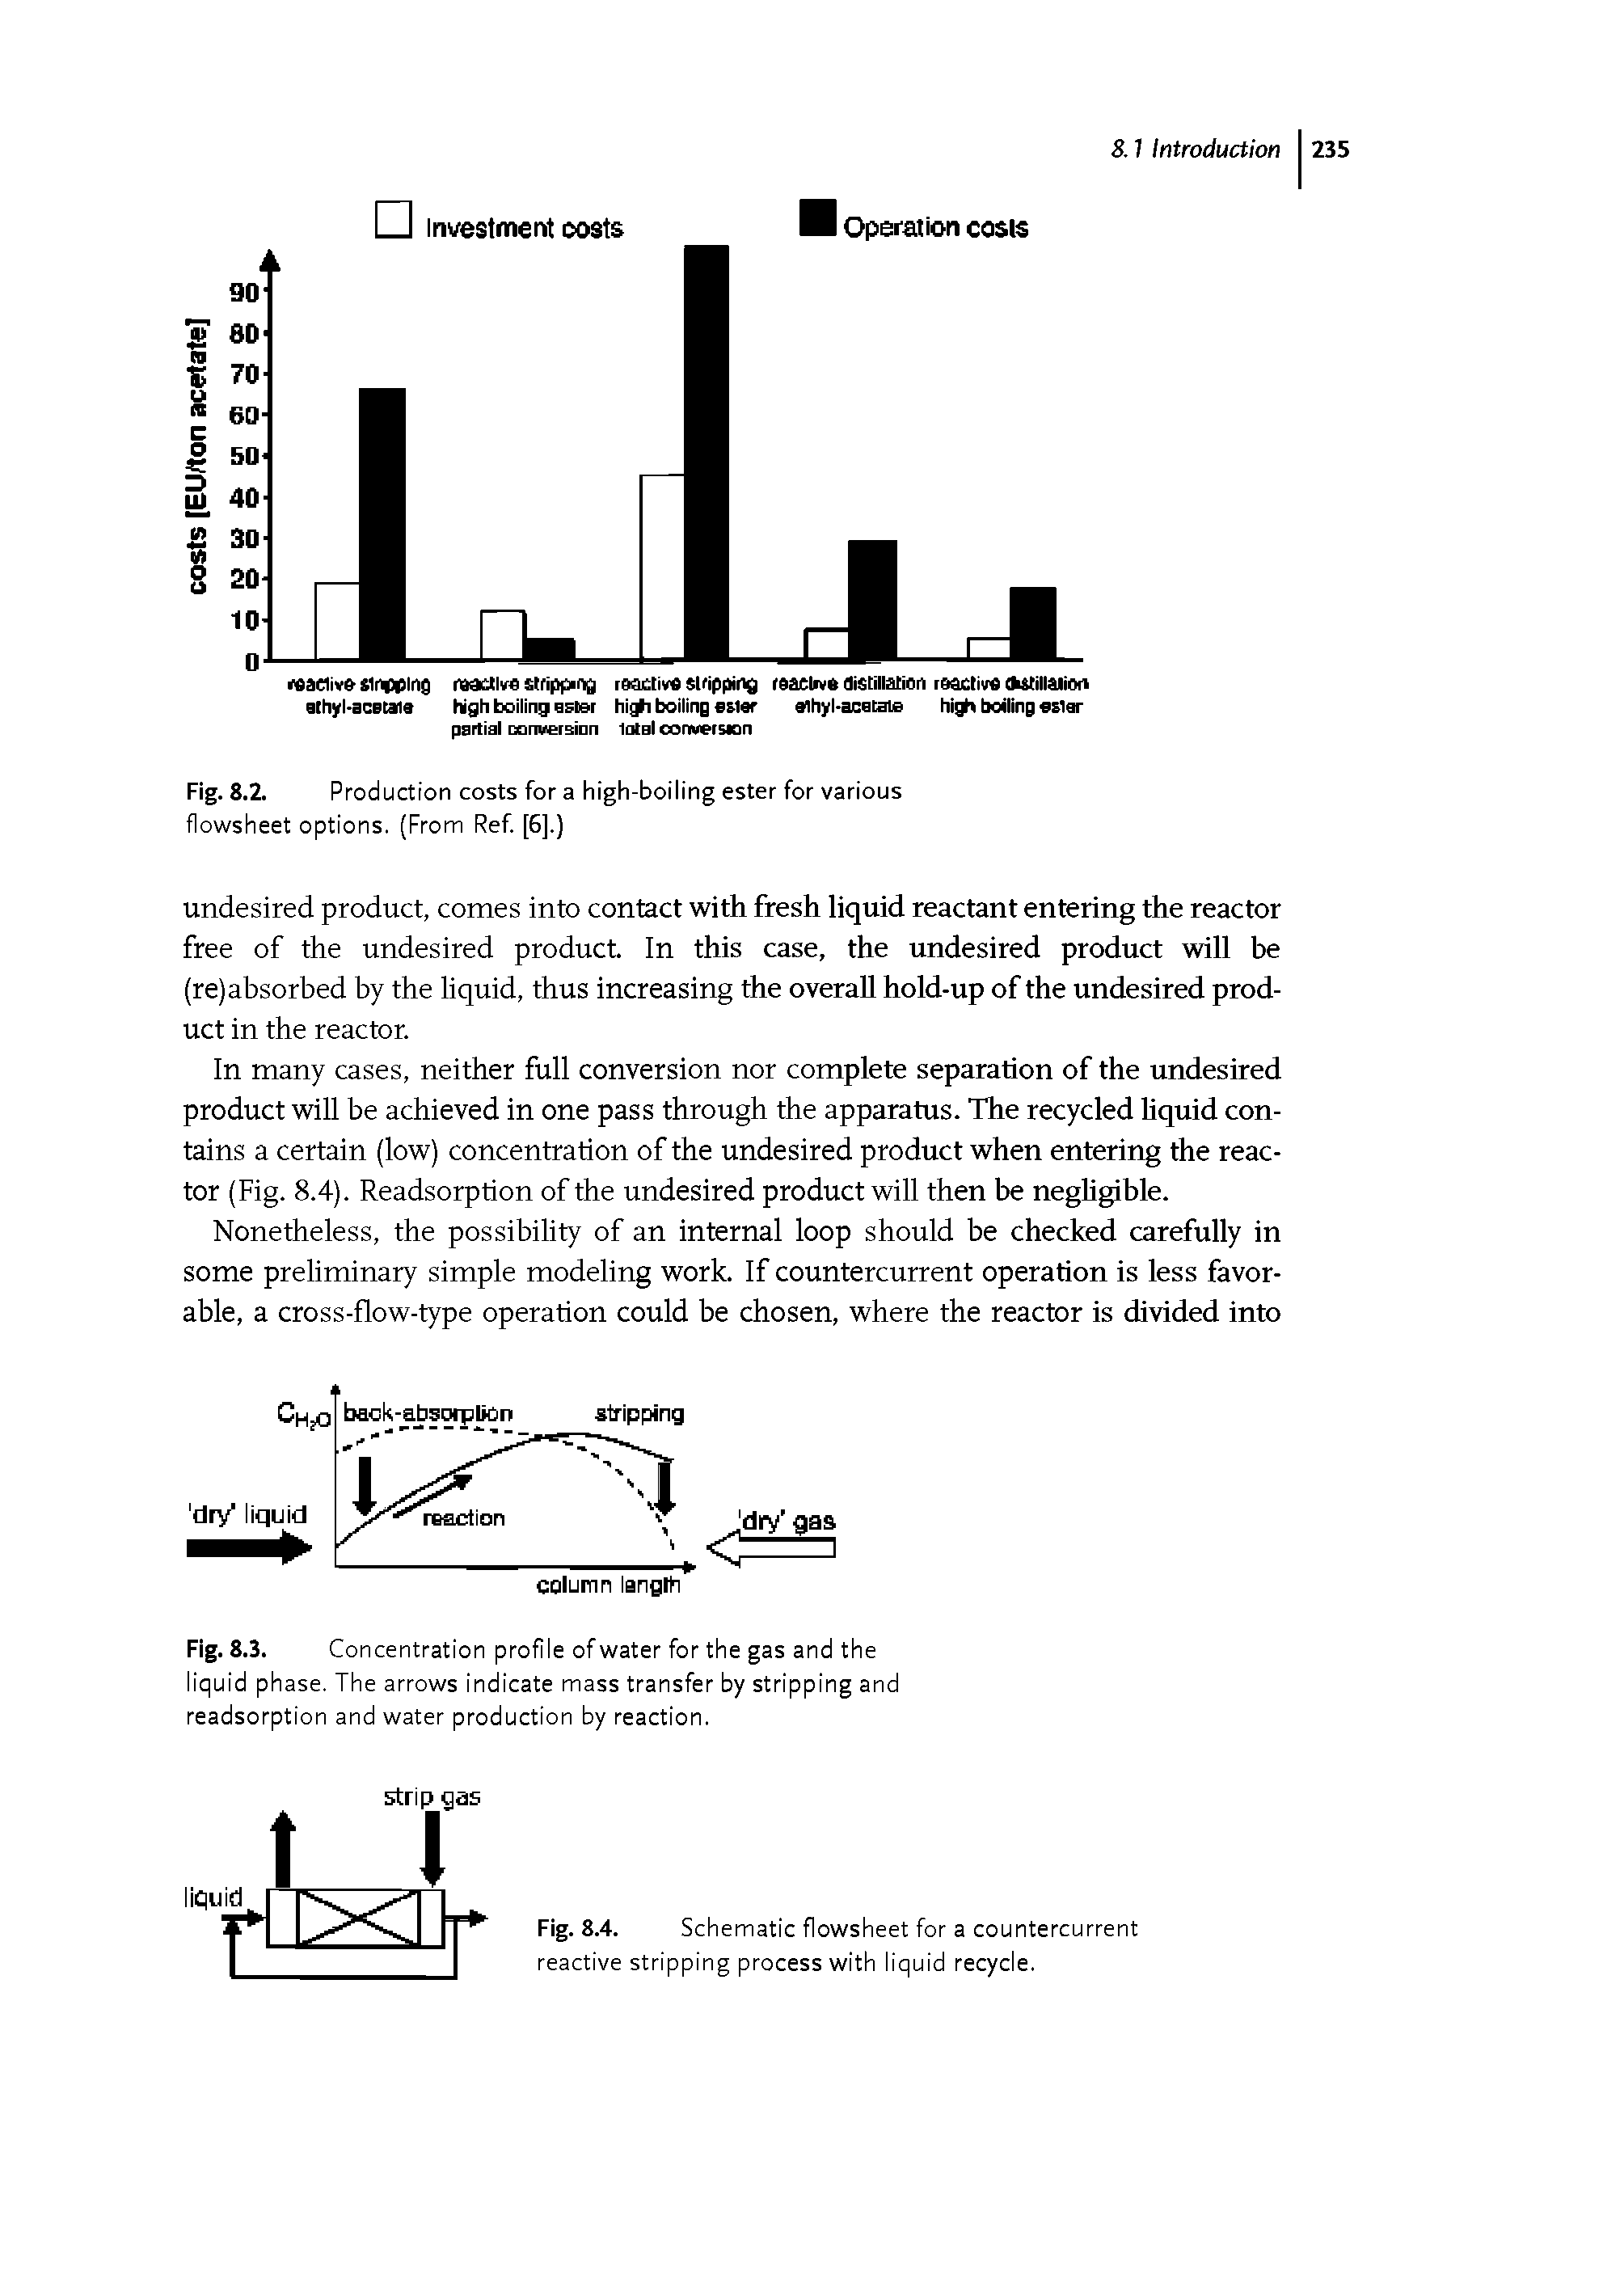 Fig. 8.2. Production costs for a high-boiling ester for various flowsheet options. (From Ref. [6].)...